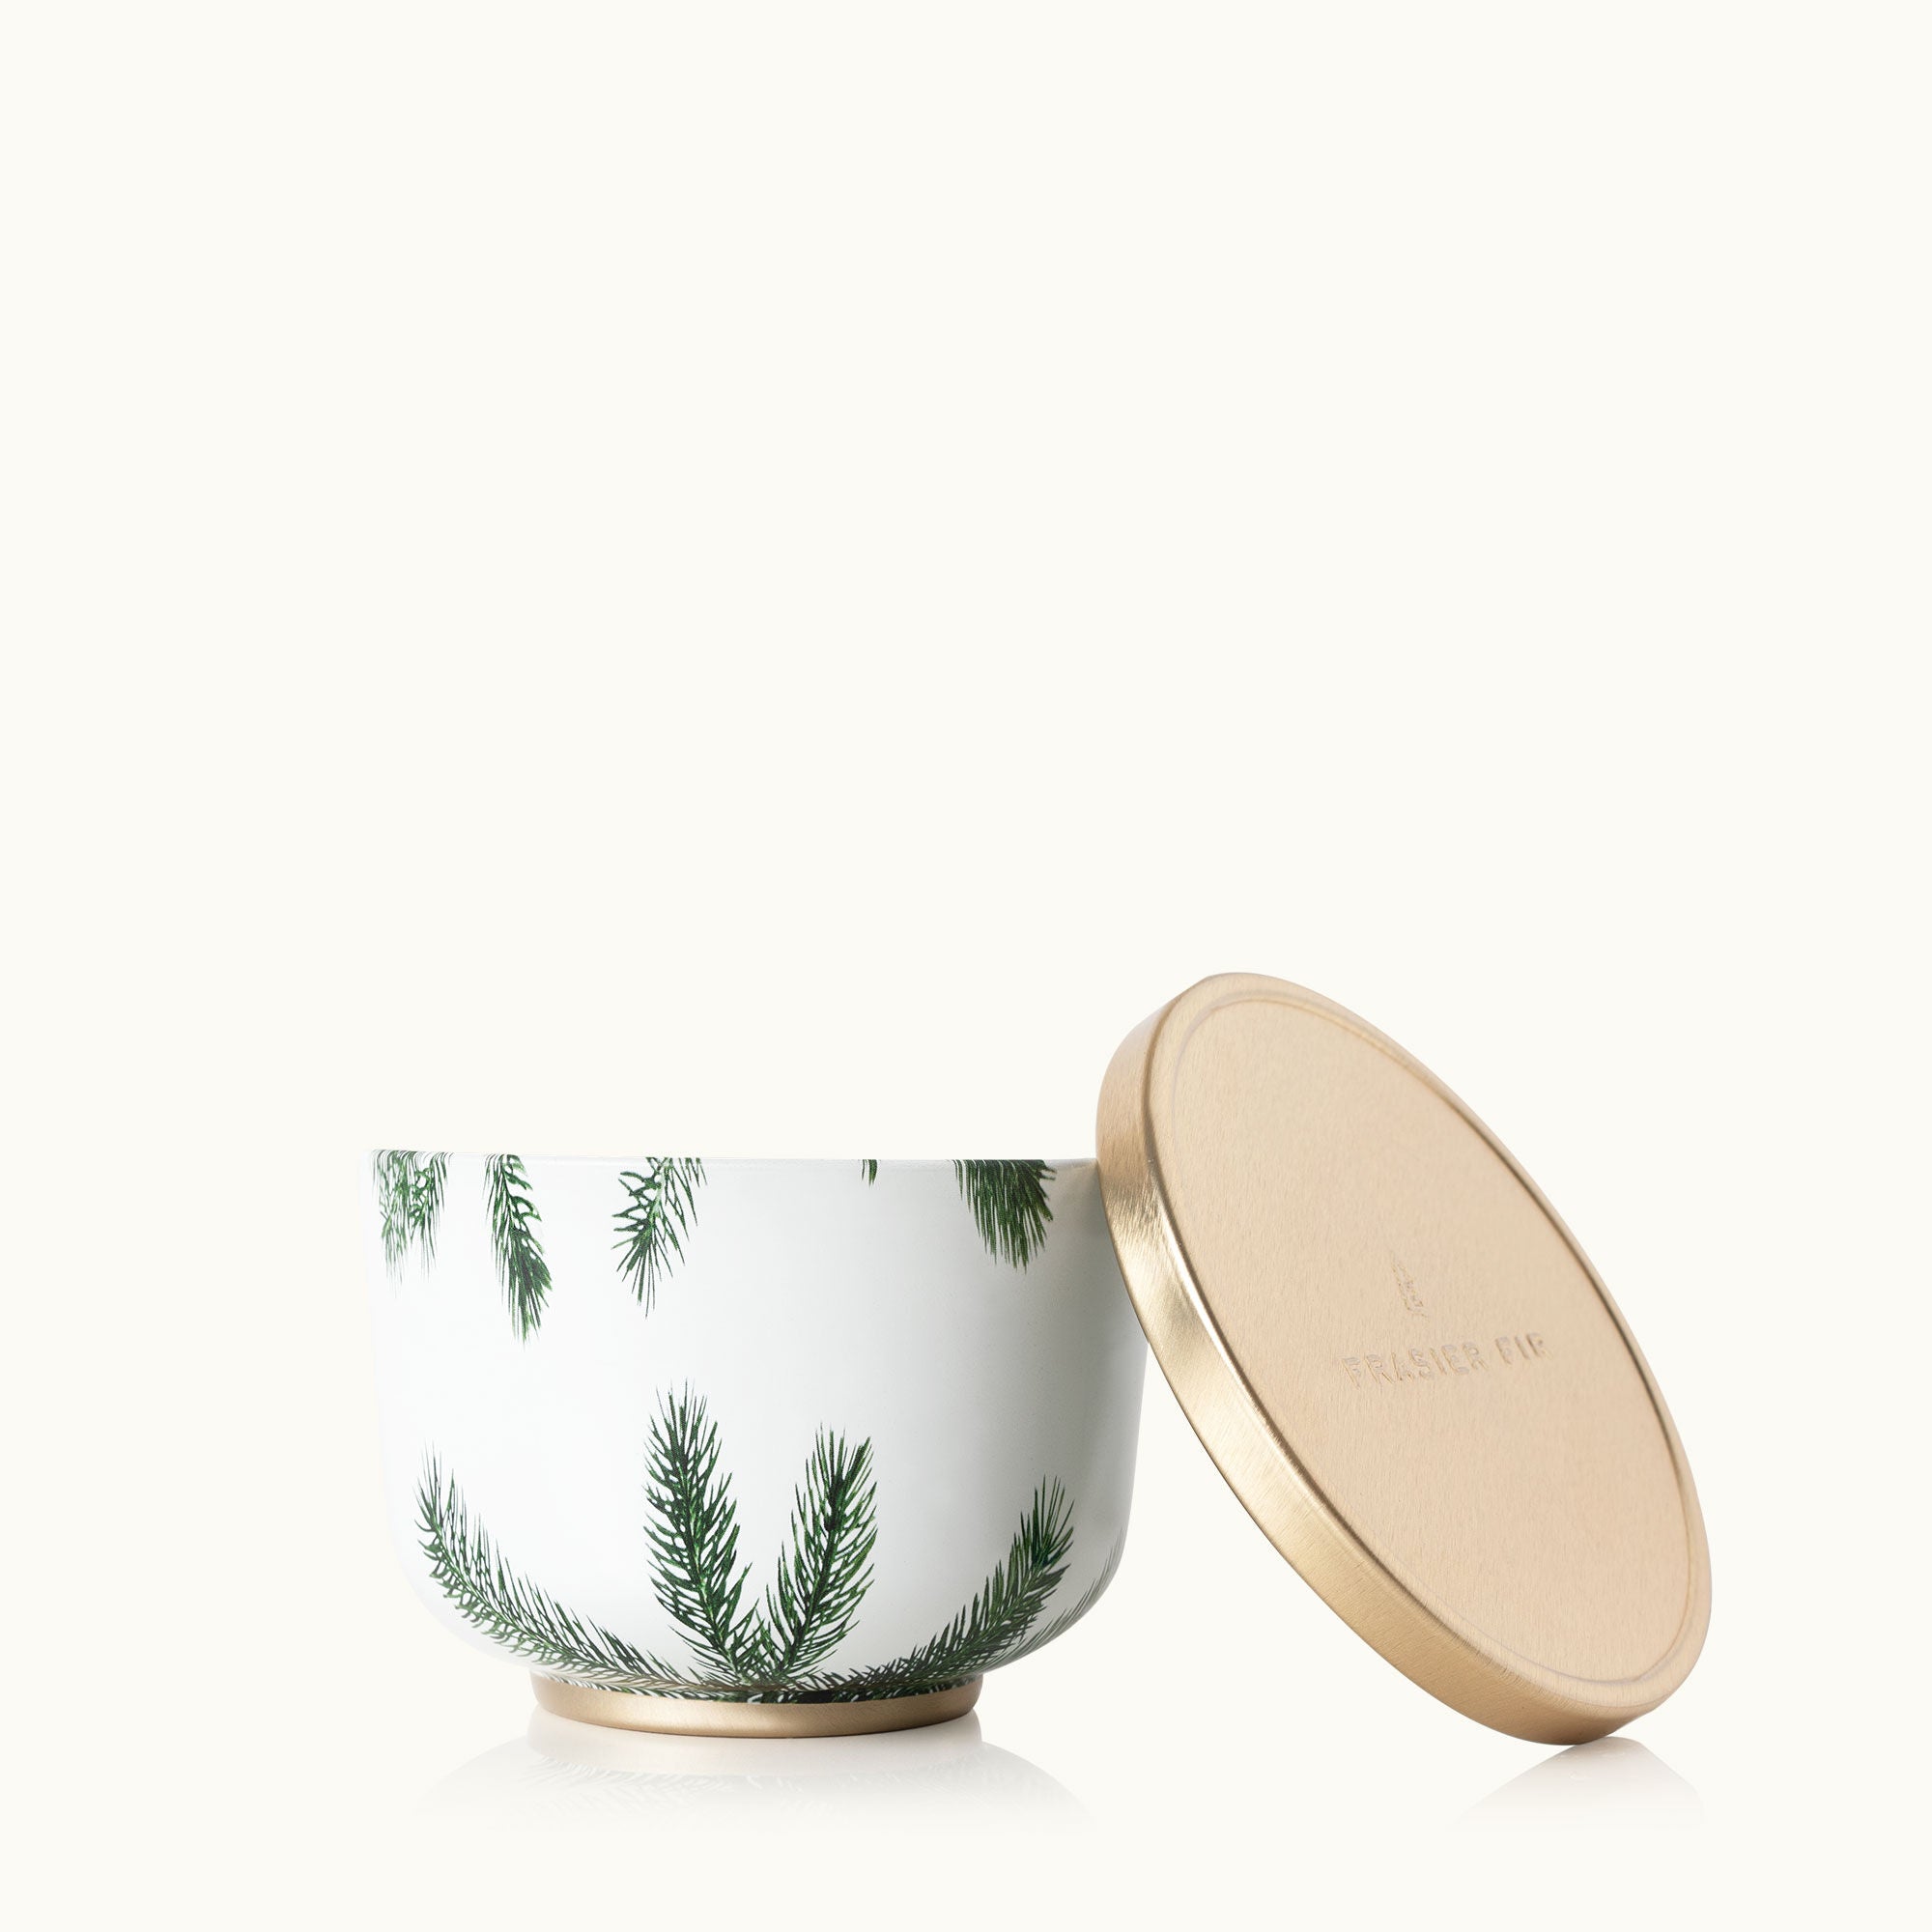 Thymes Poured Candle Tin, Frasier Fir